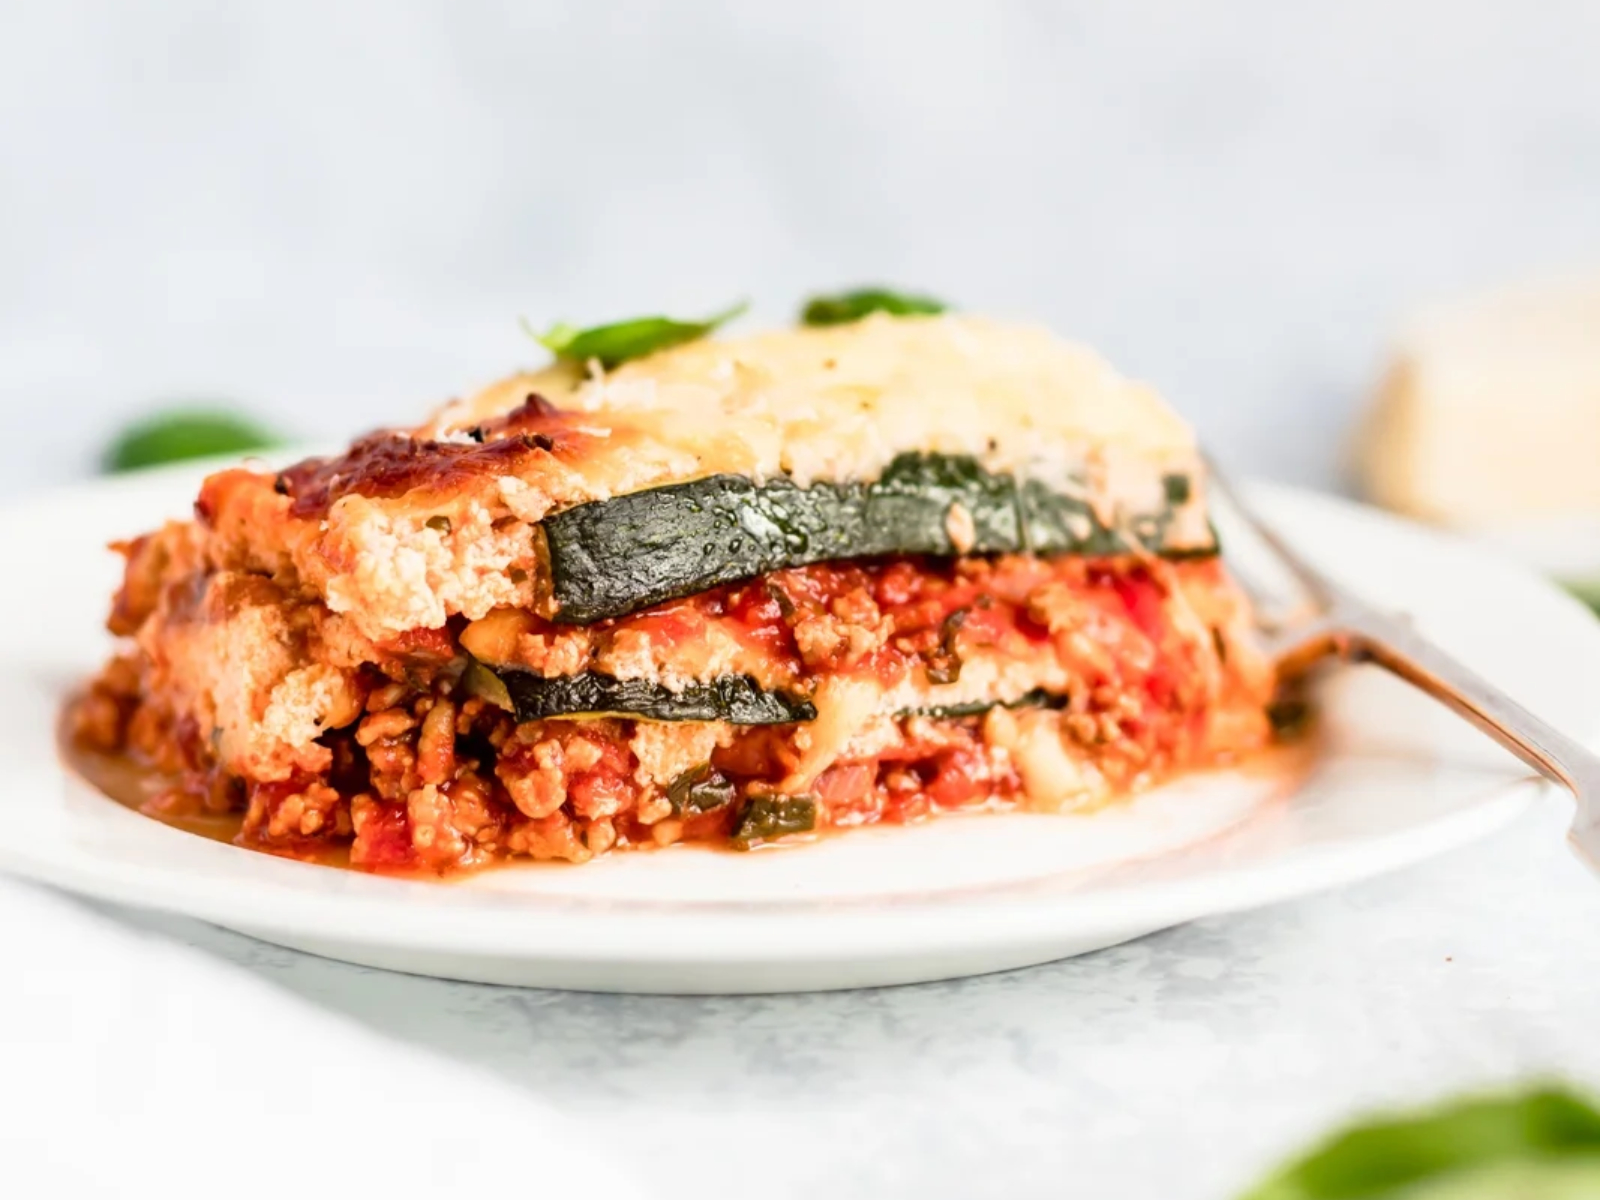 Healthy Low-Carb Zucchini Lasagna with Spicy Turkey Meat Sauce